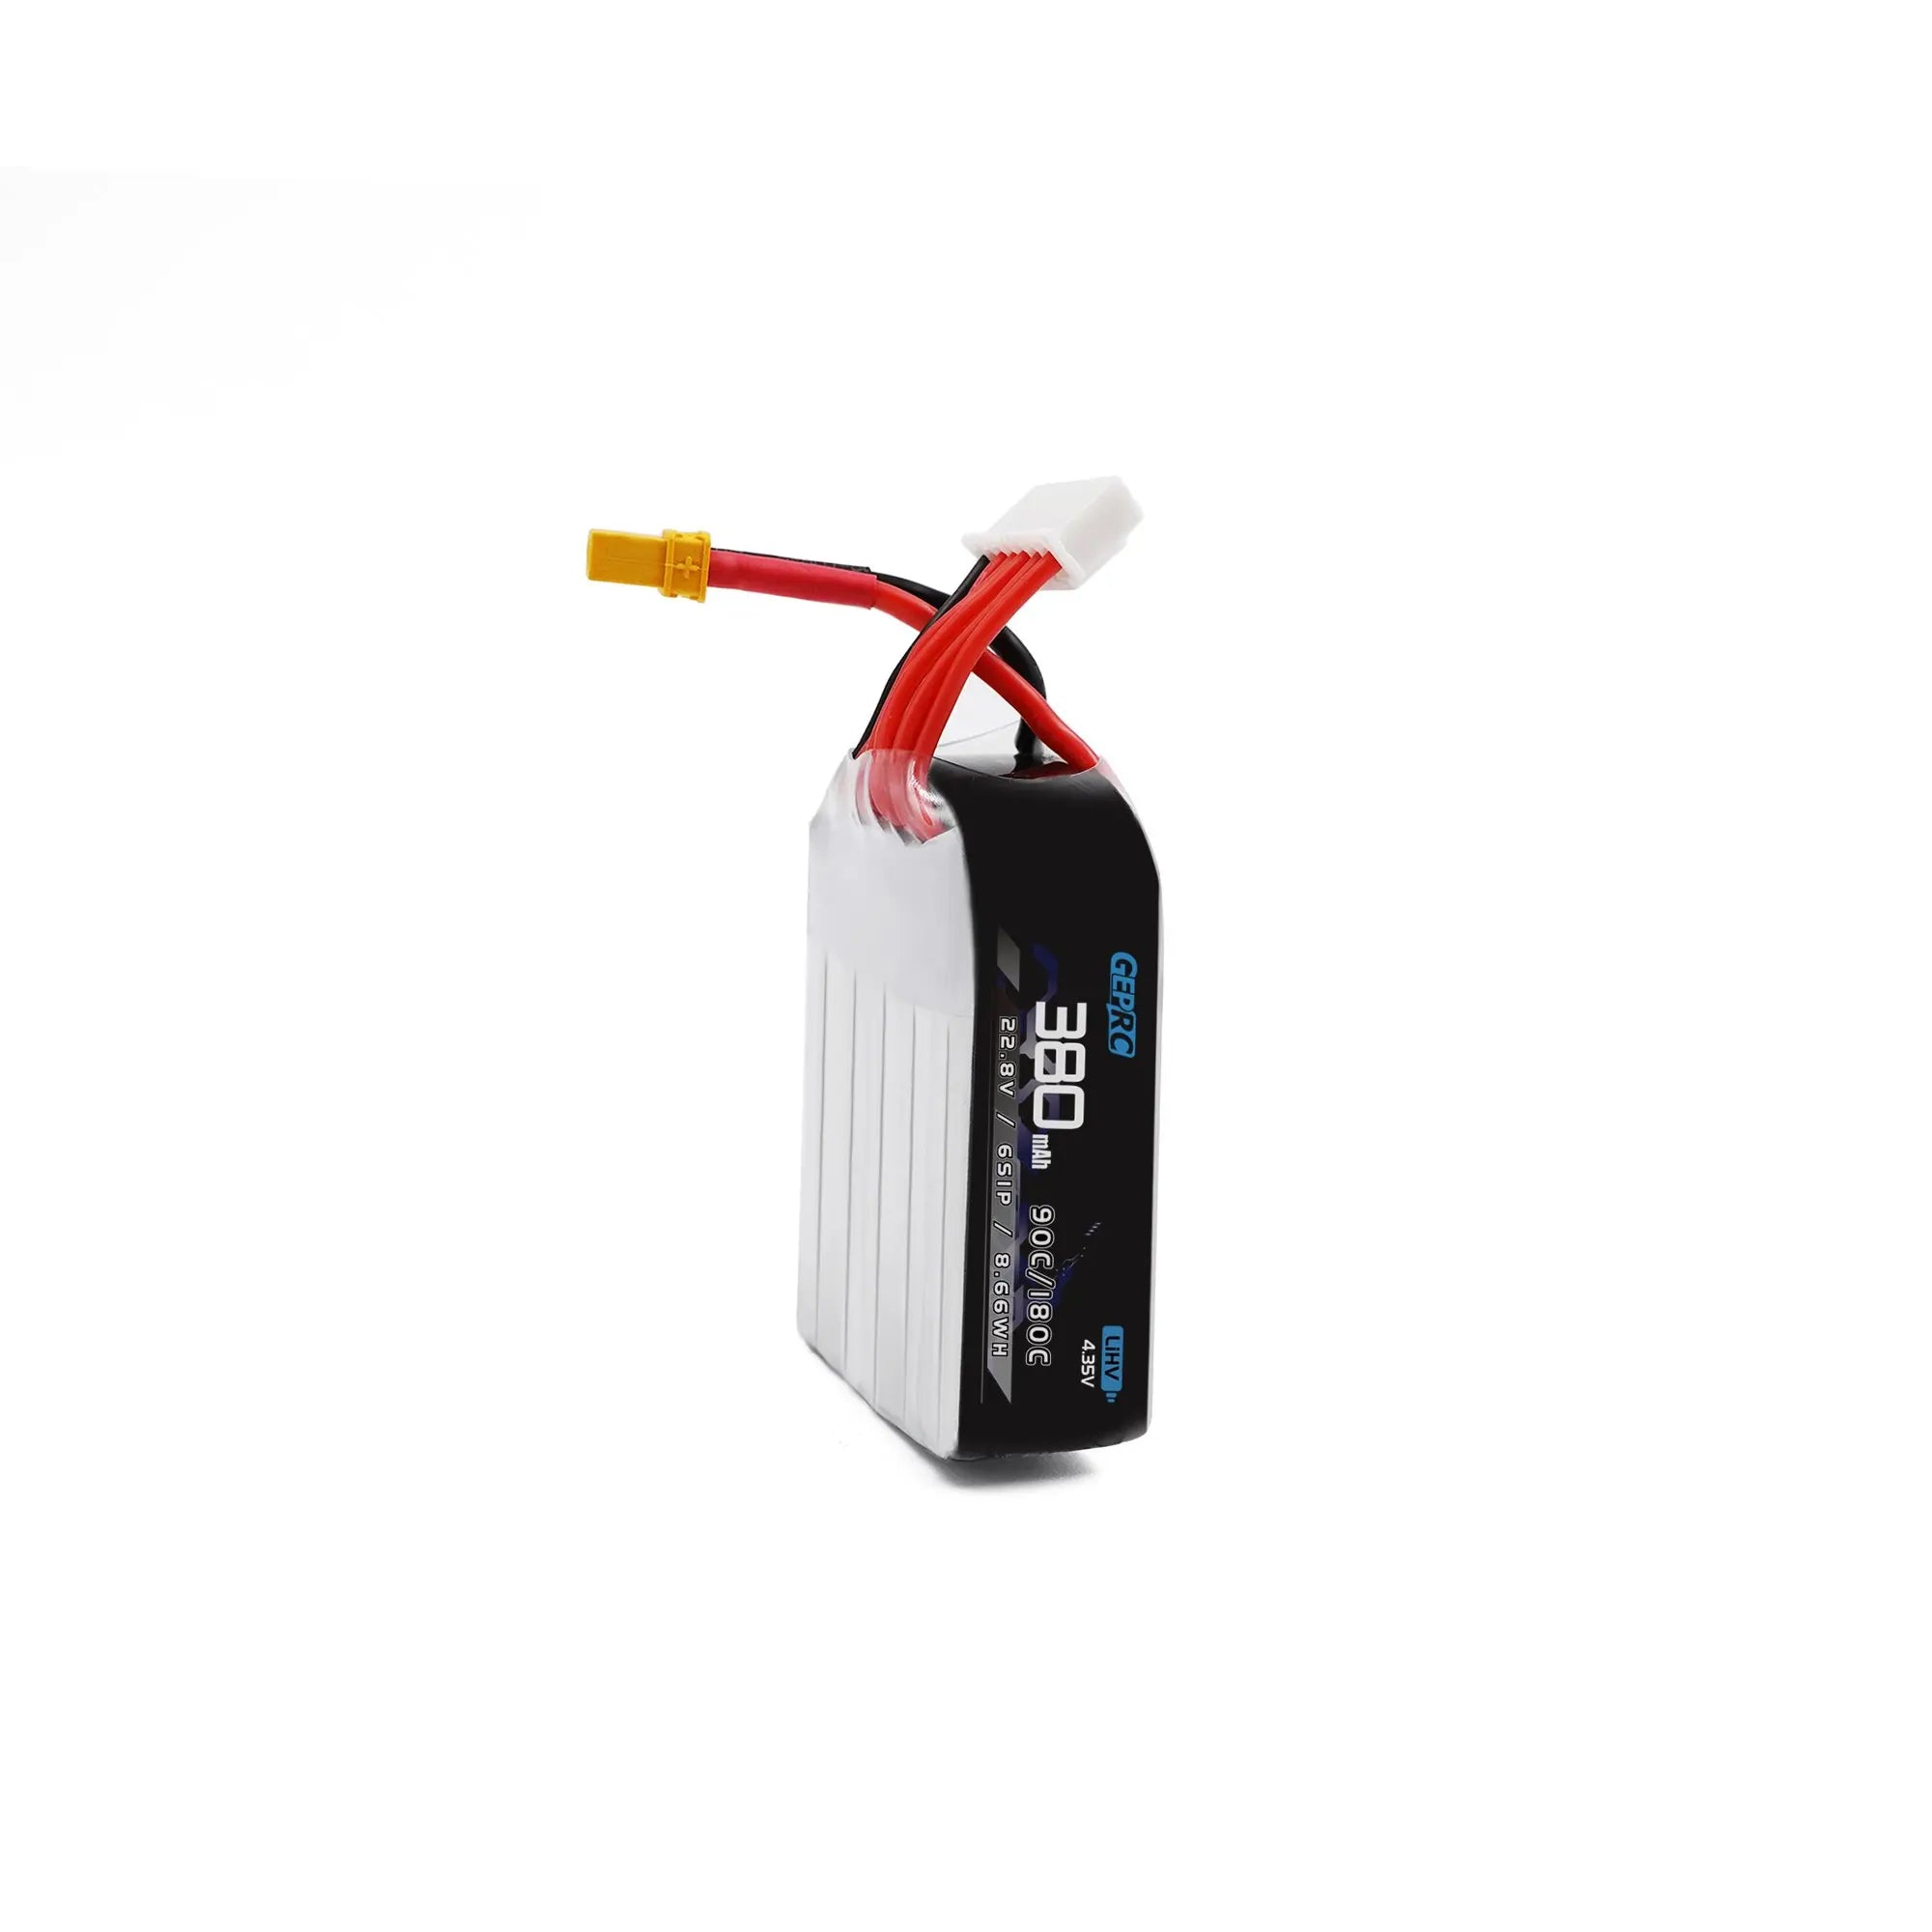 GEPRC 6S 380mAh Battery, a charge-discharge activation is performed within 3 months to maintain the stability of